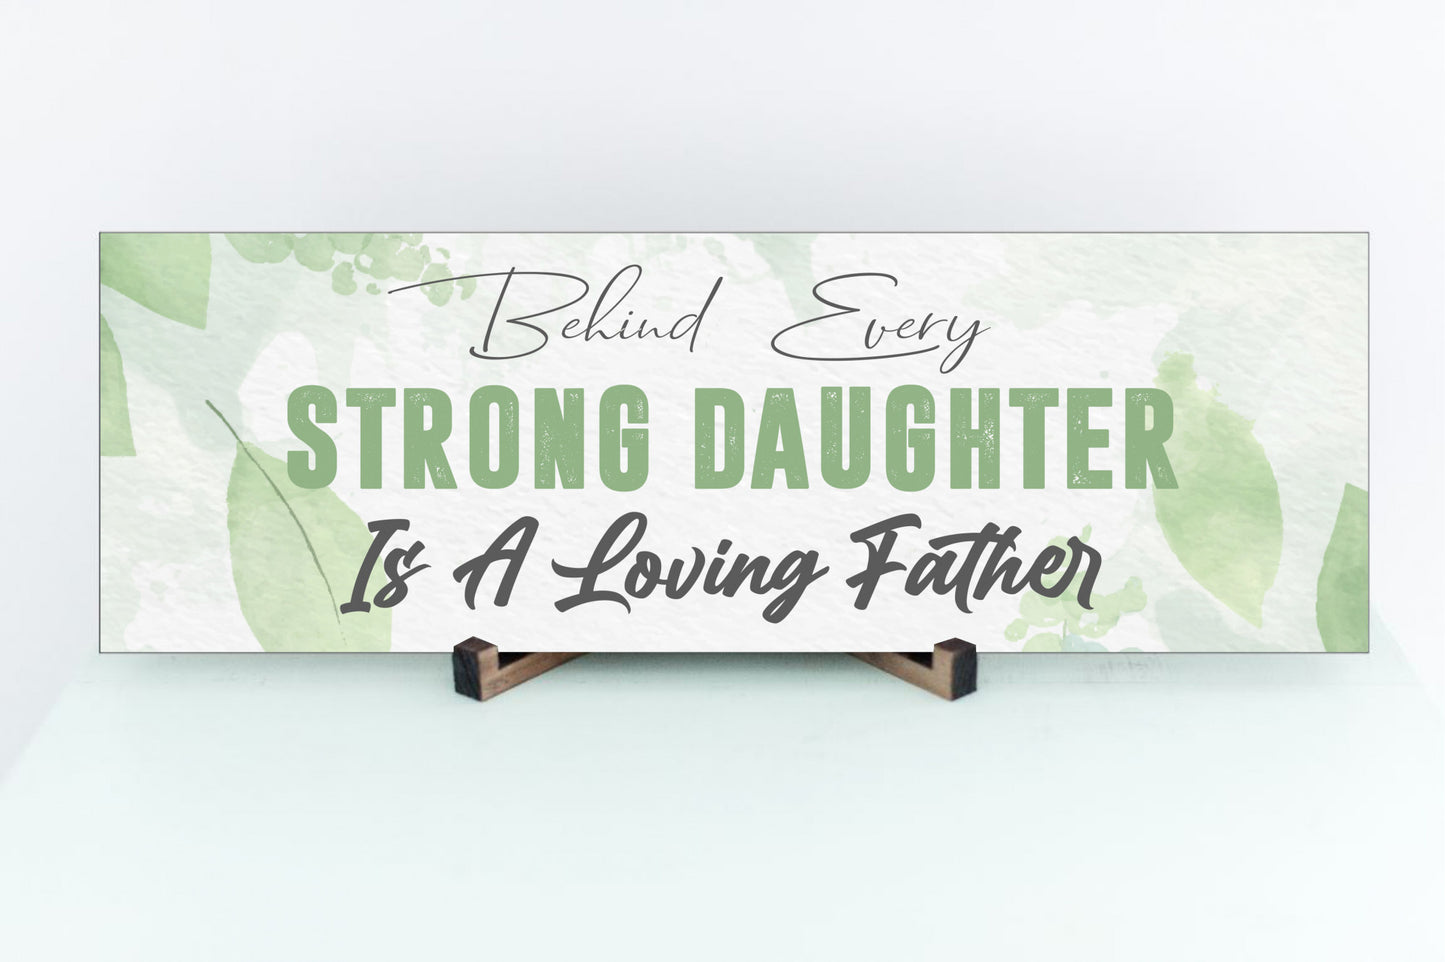 Behind Every Strong Daughter Is A Loving Father Wall Sign or Table Display